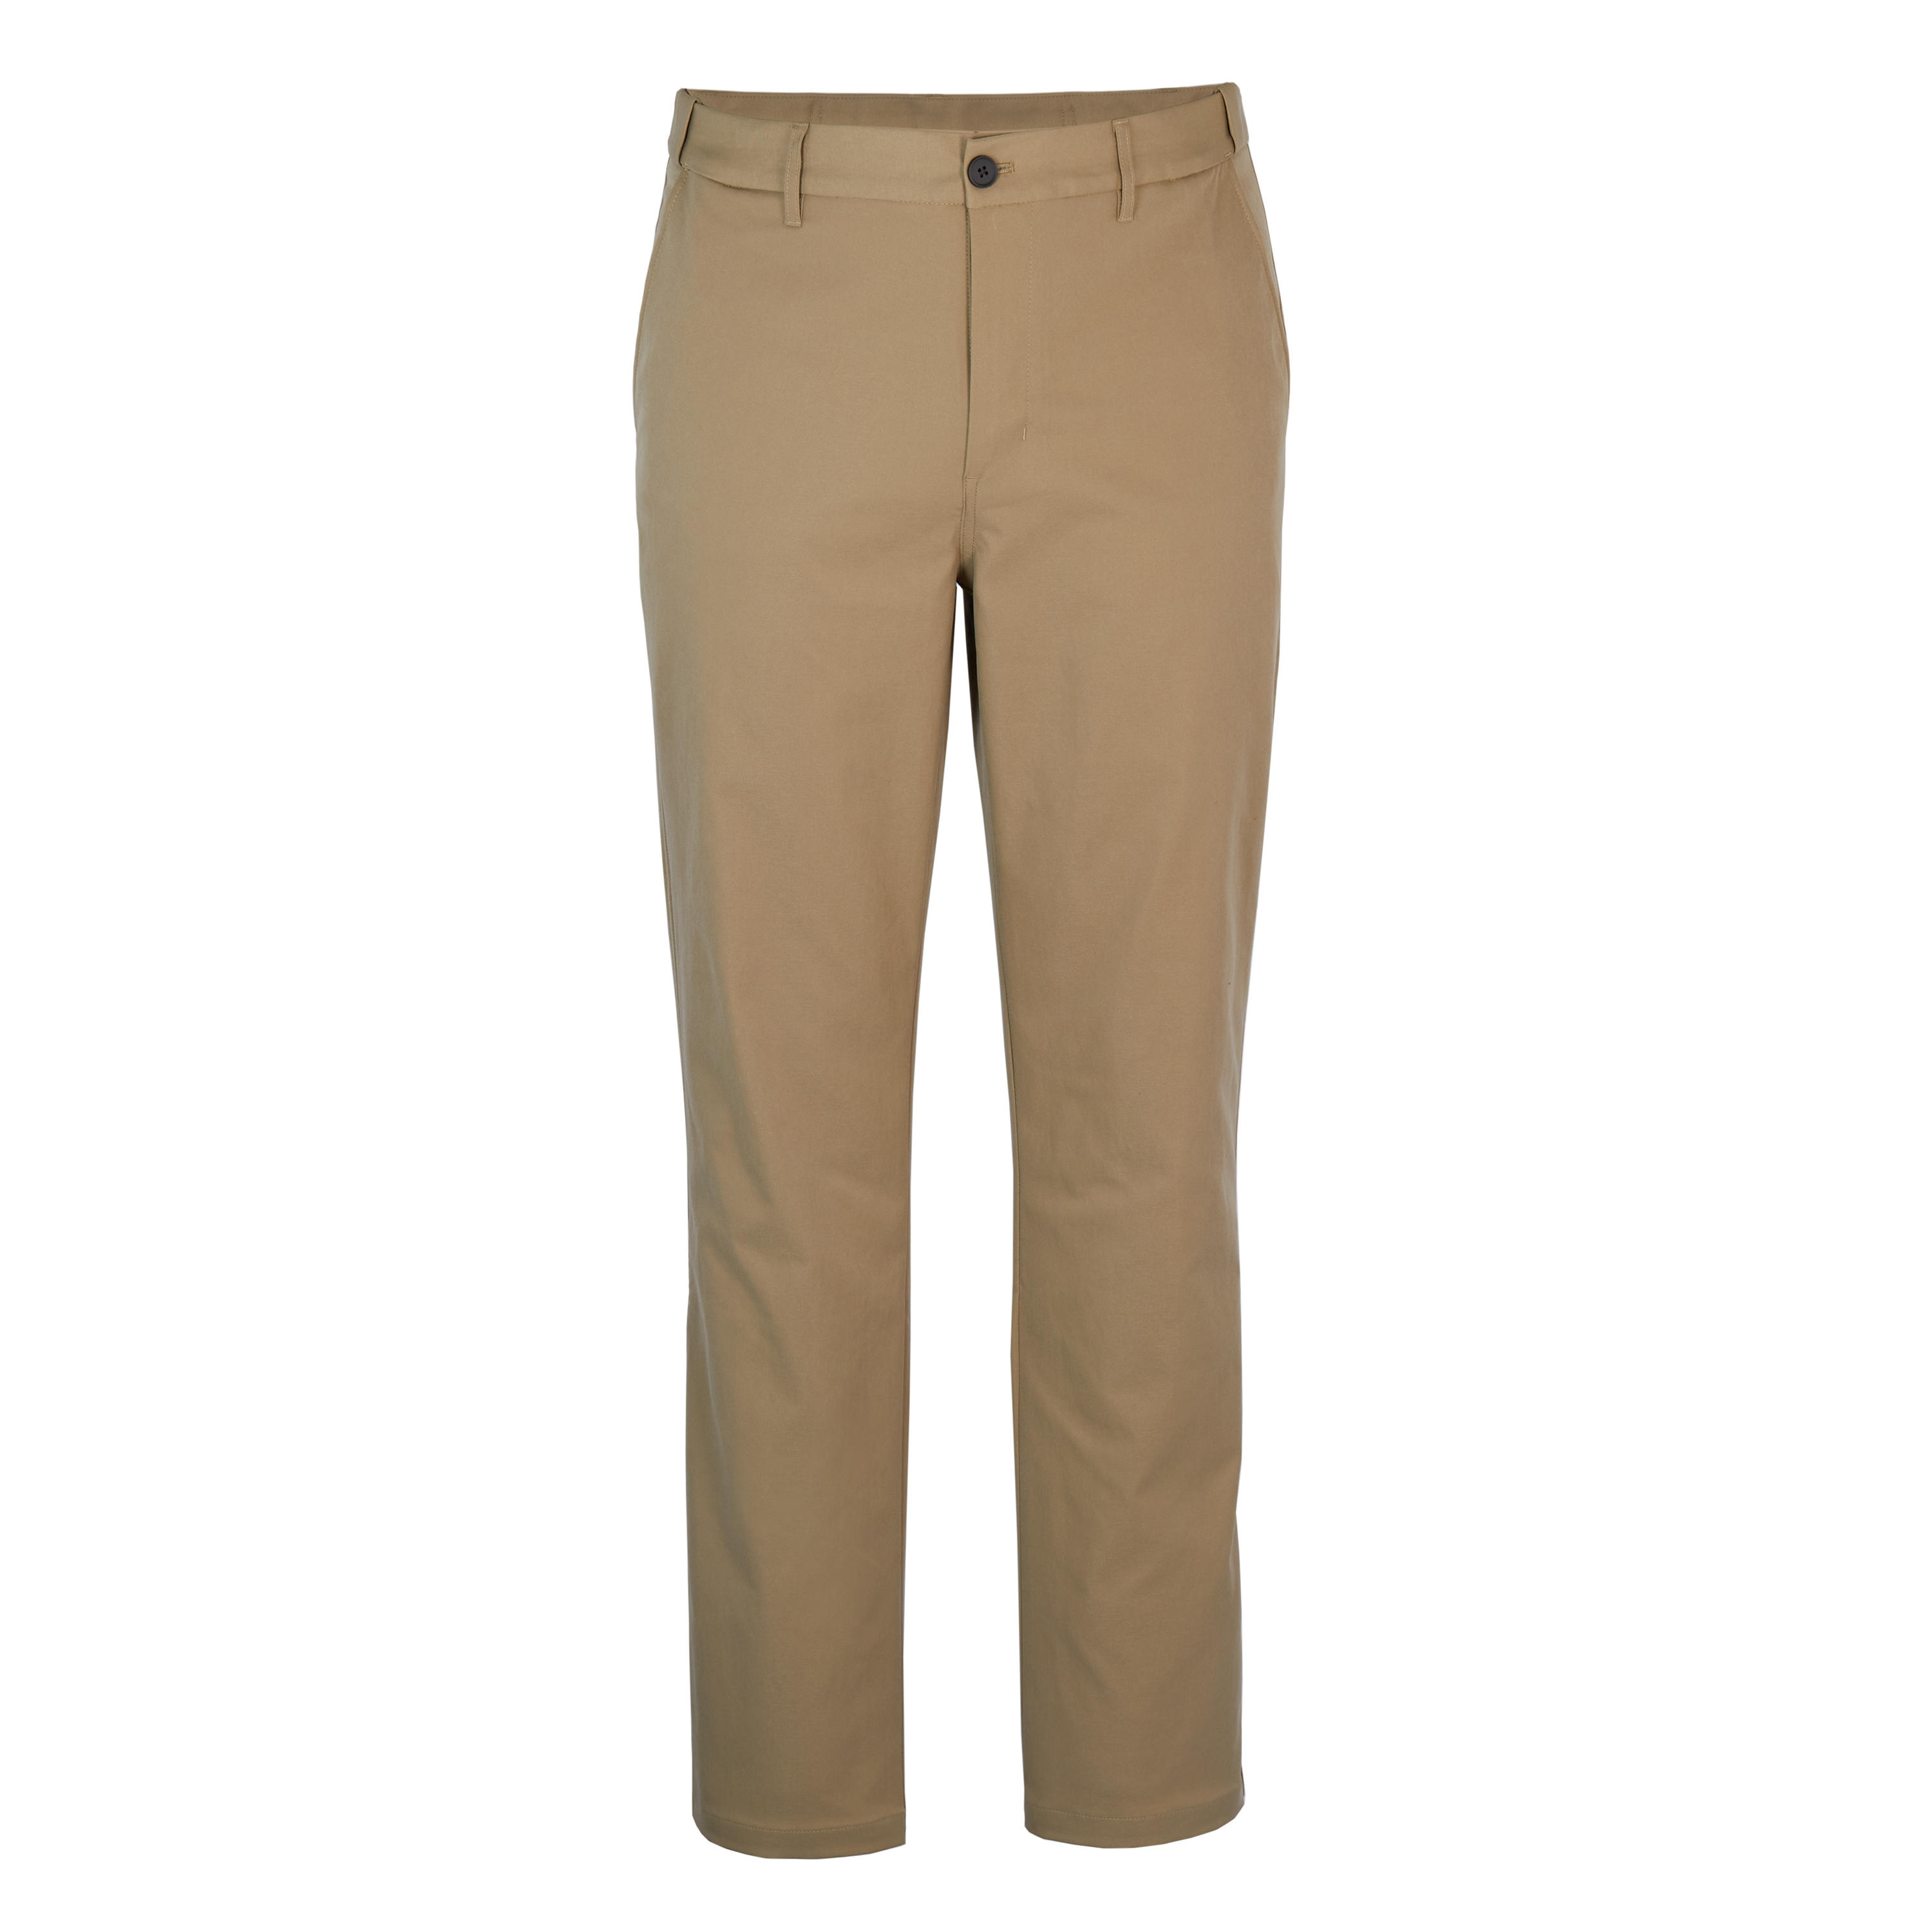 Rohan Men's Grand Tour Chinos Size 34 Very Good Condition 